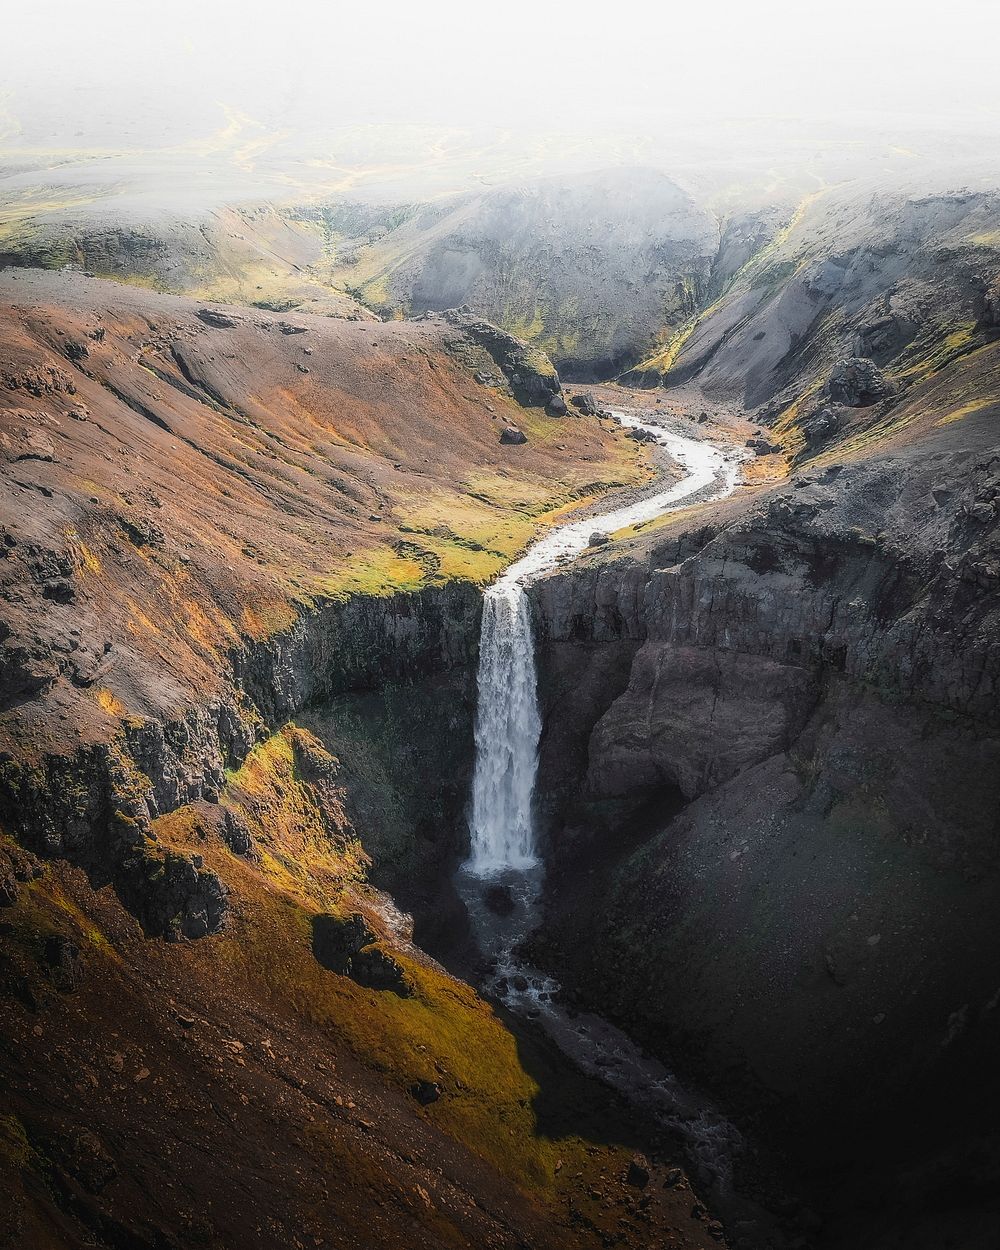 View of a waterfall in Highlands, Iceland